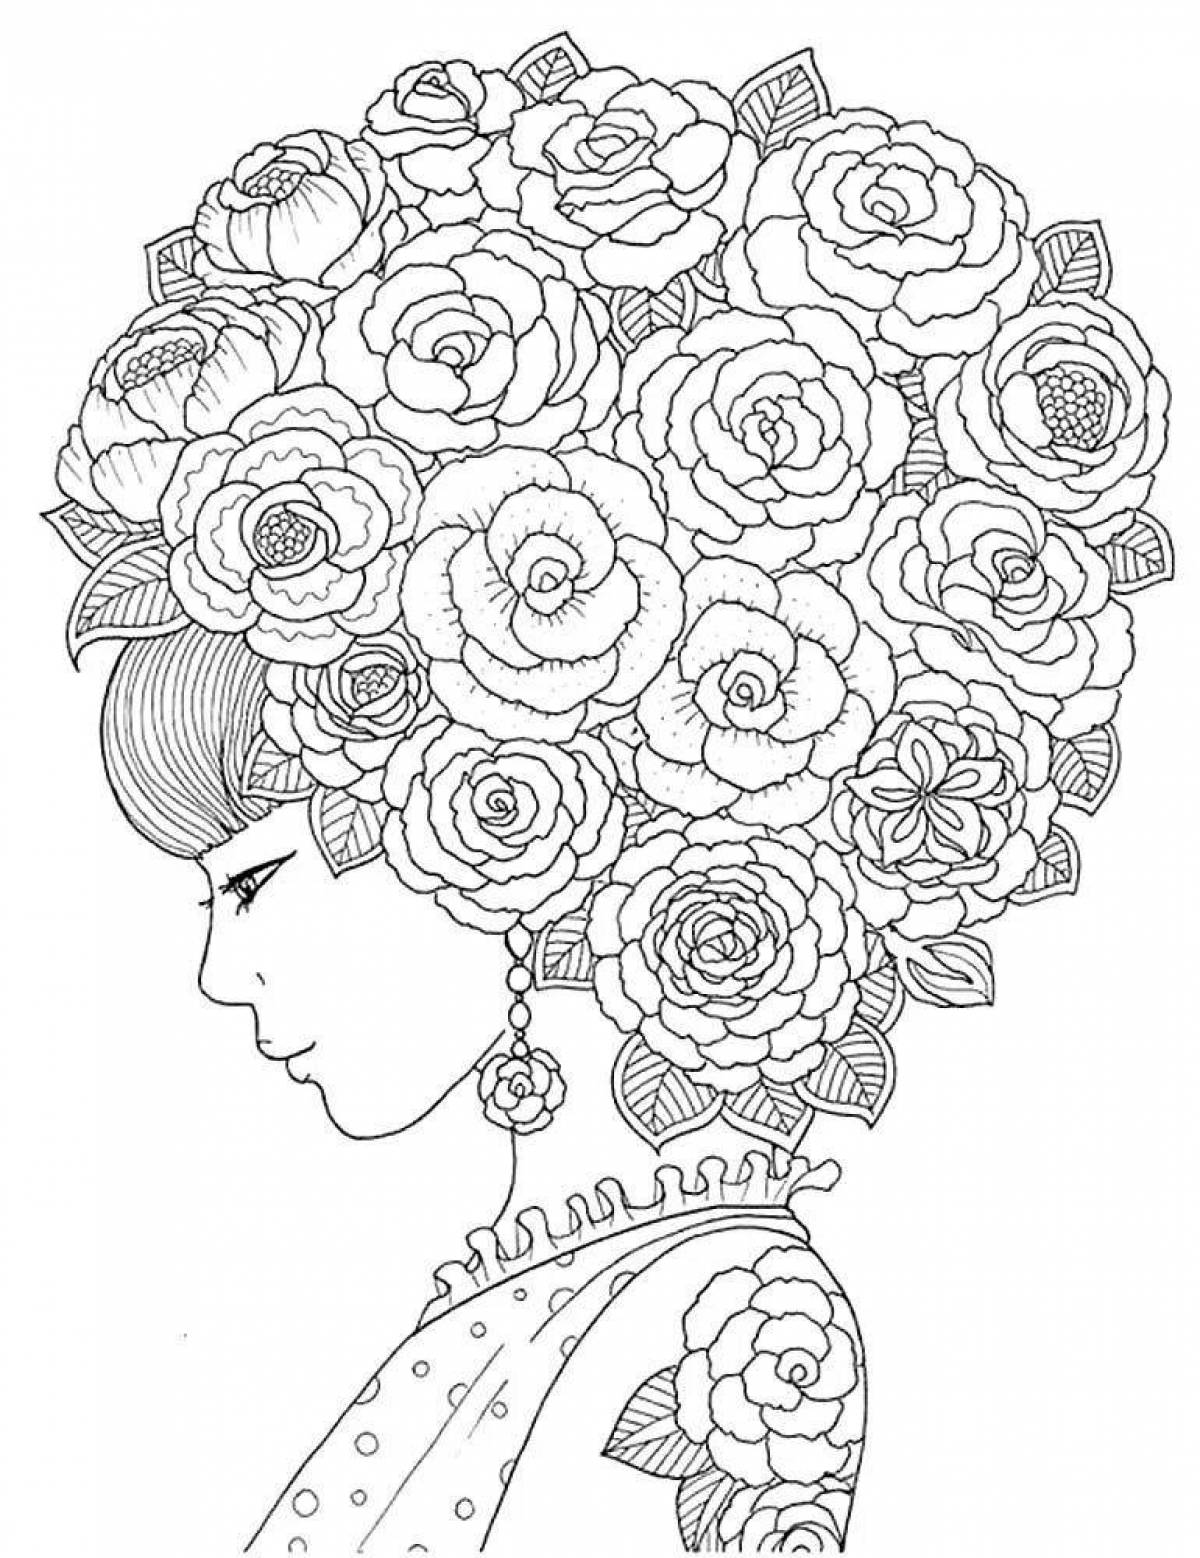 Adorable adult girls coloring page